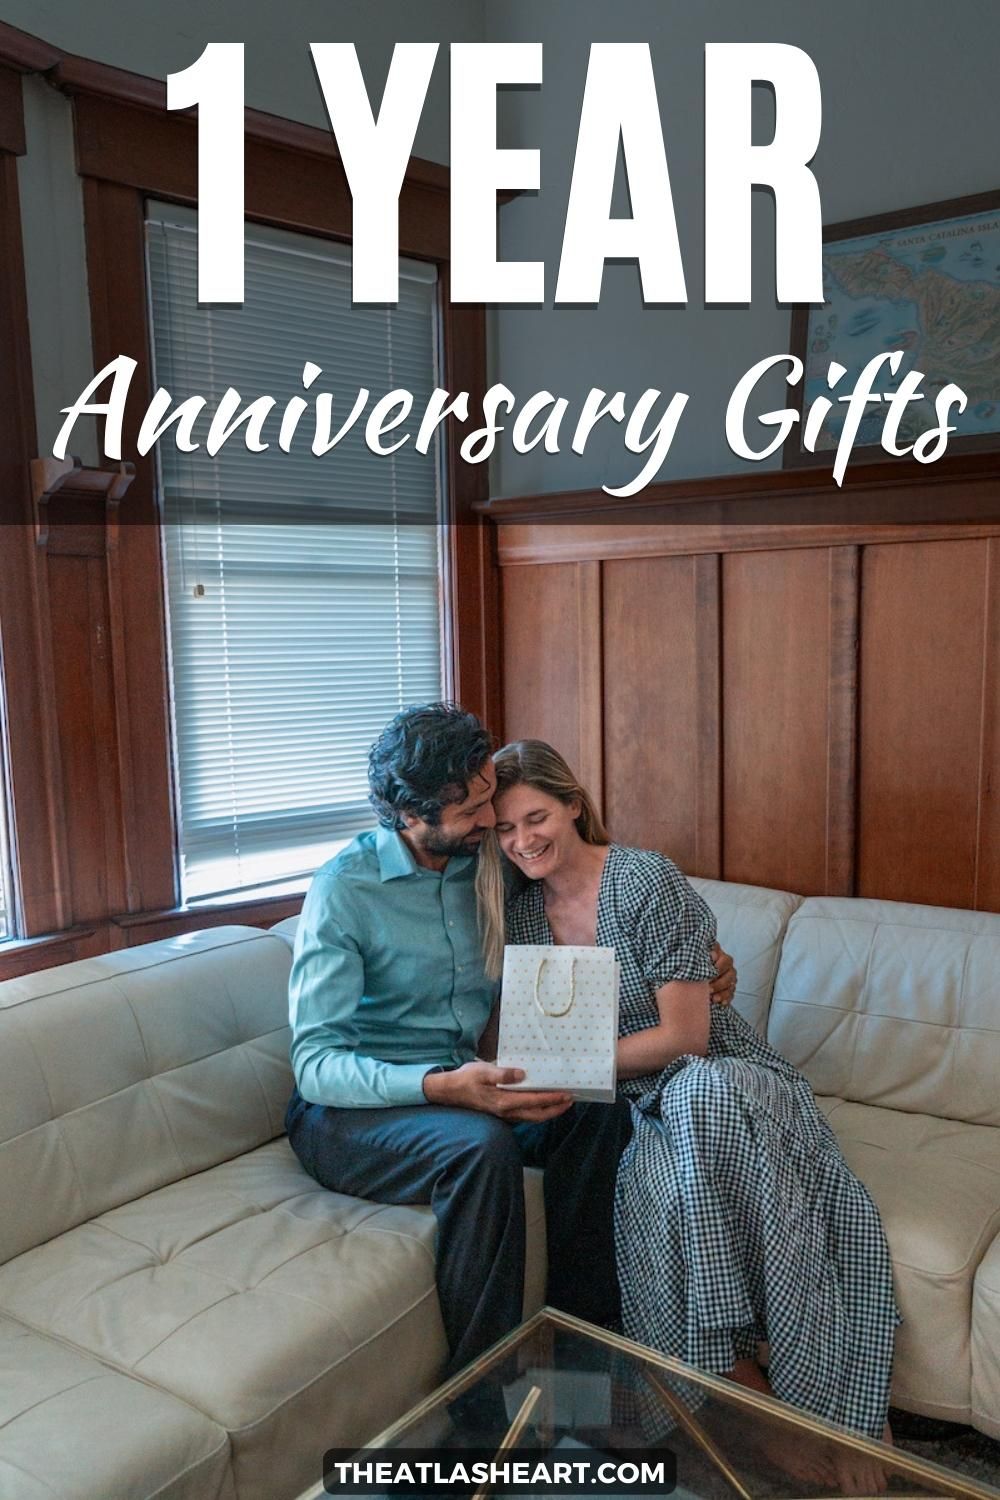 A man in a blue shirt embraces a woman in a gingham maxi dress and hands her a white gift bag  as they sit in the corner of an L-shaped, white leather couch, with a wood-paneled interior in the background and the text overlay, "1 Year Anniversary Gifts."